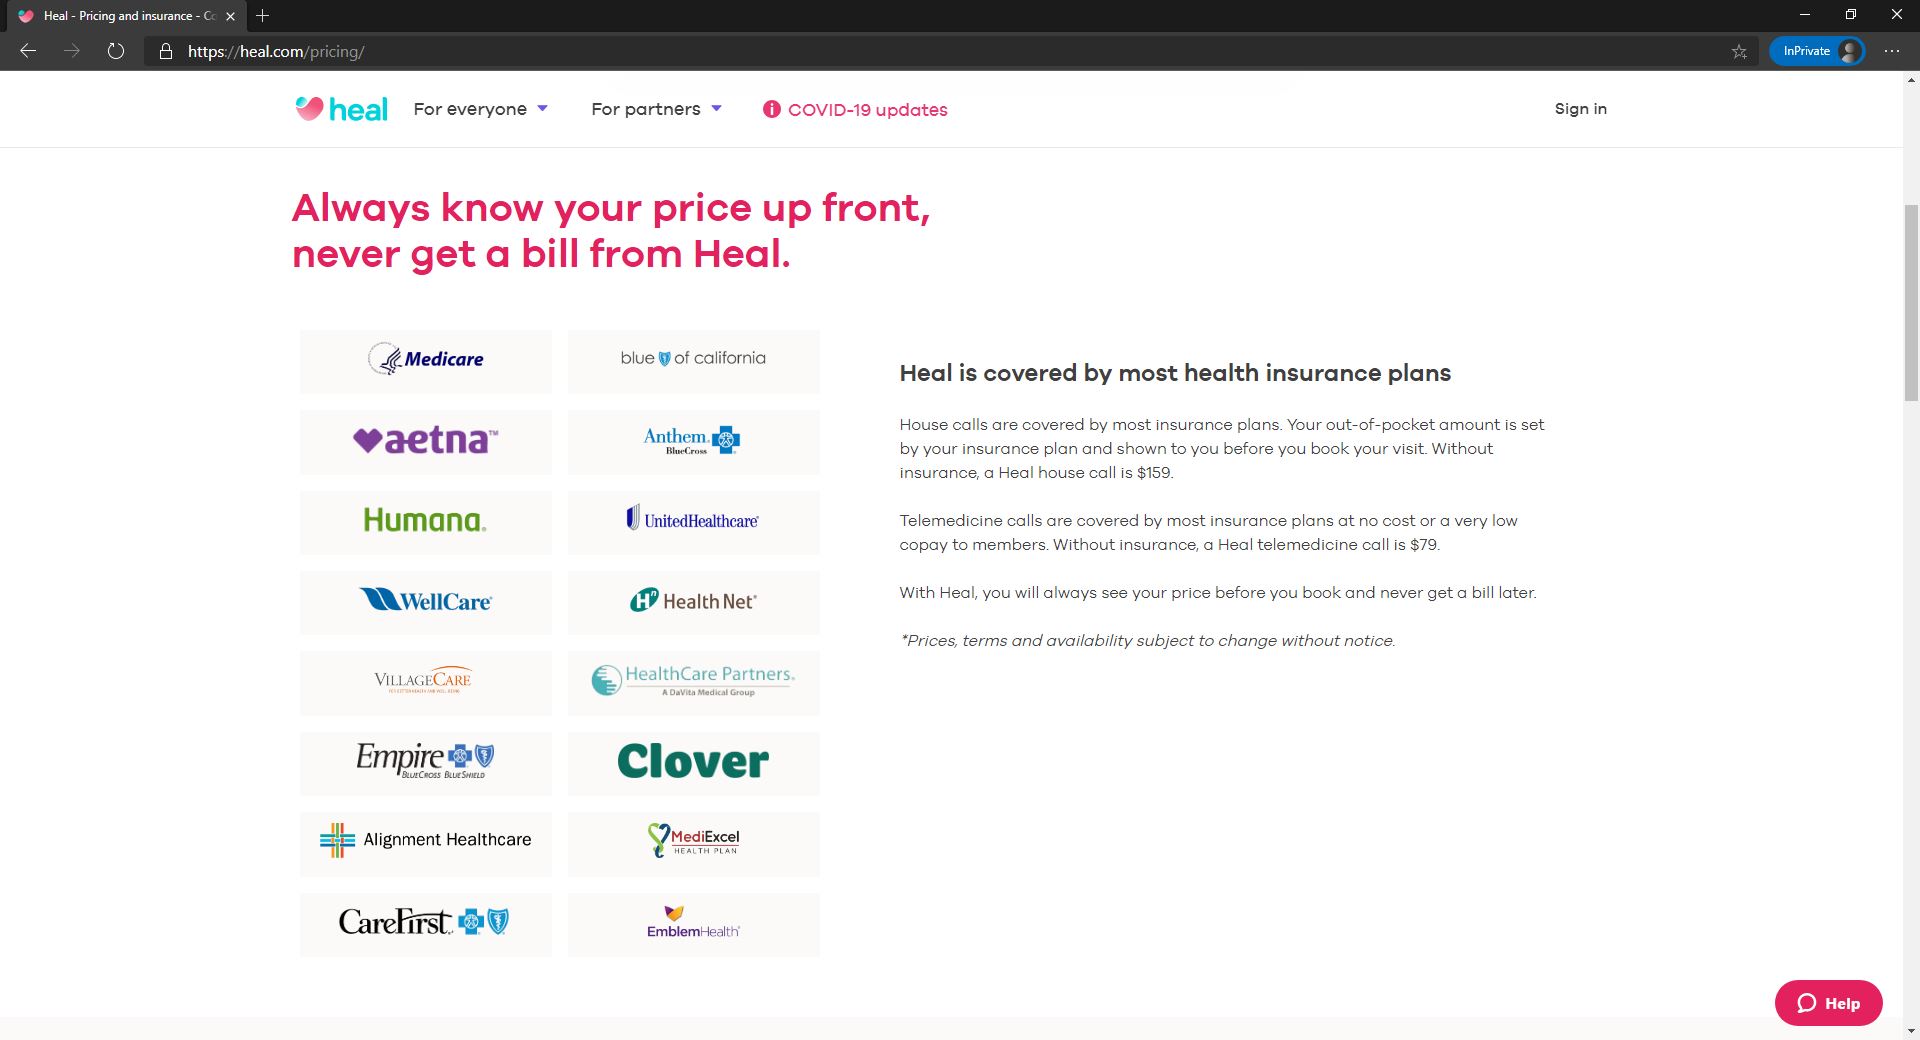 A list of health insurance partner with Heal